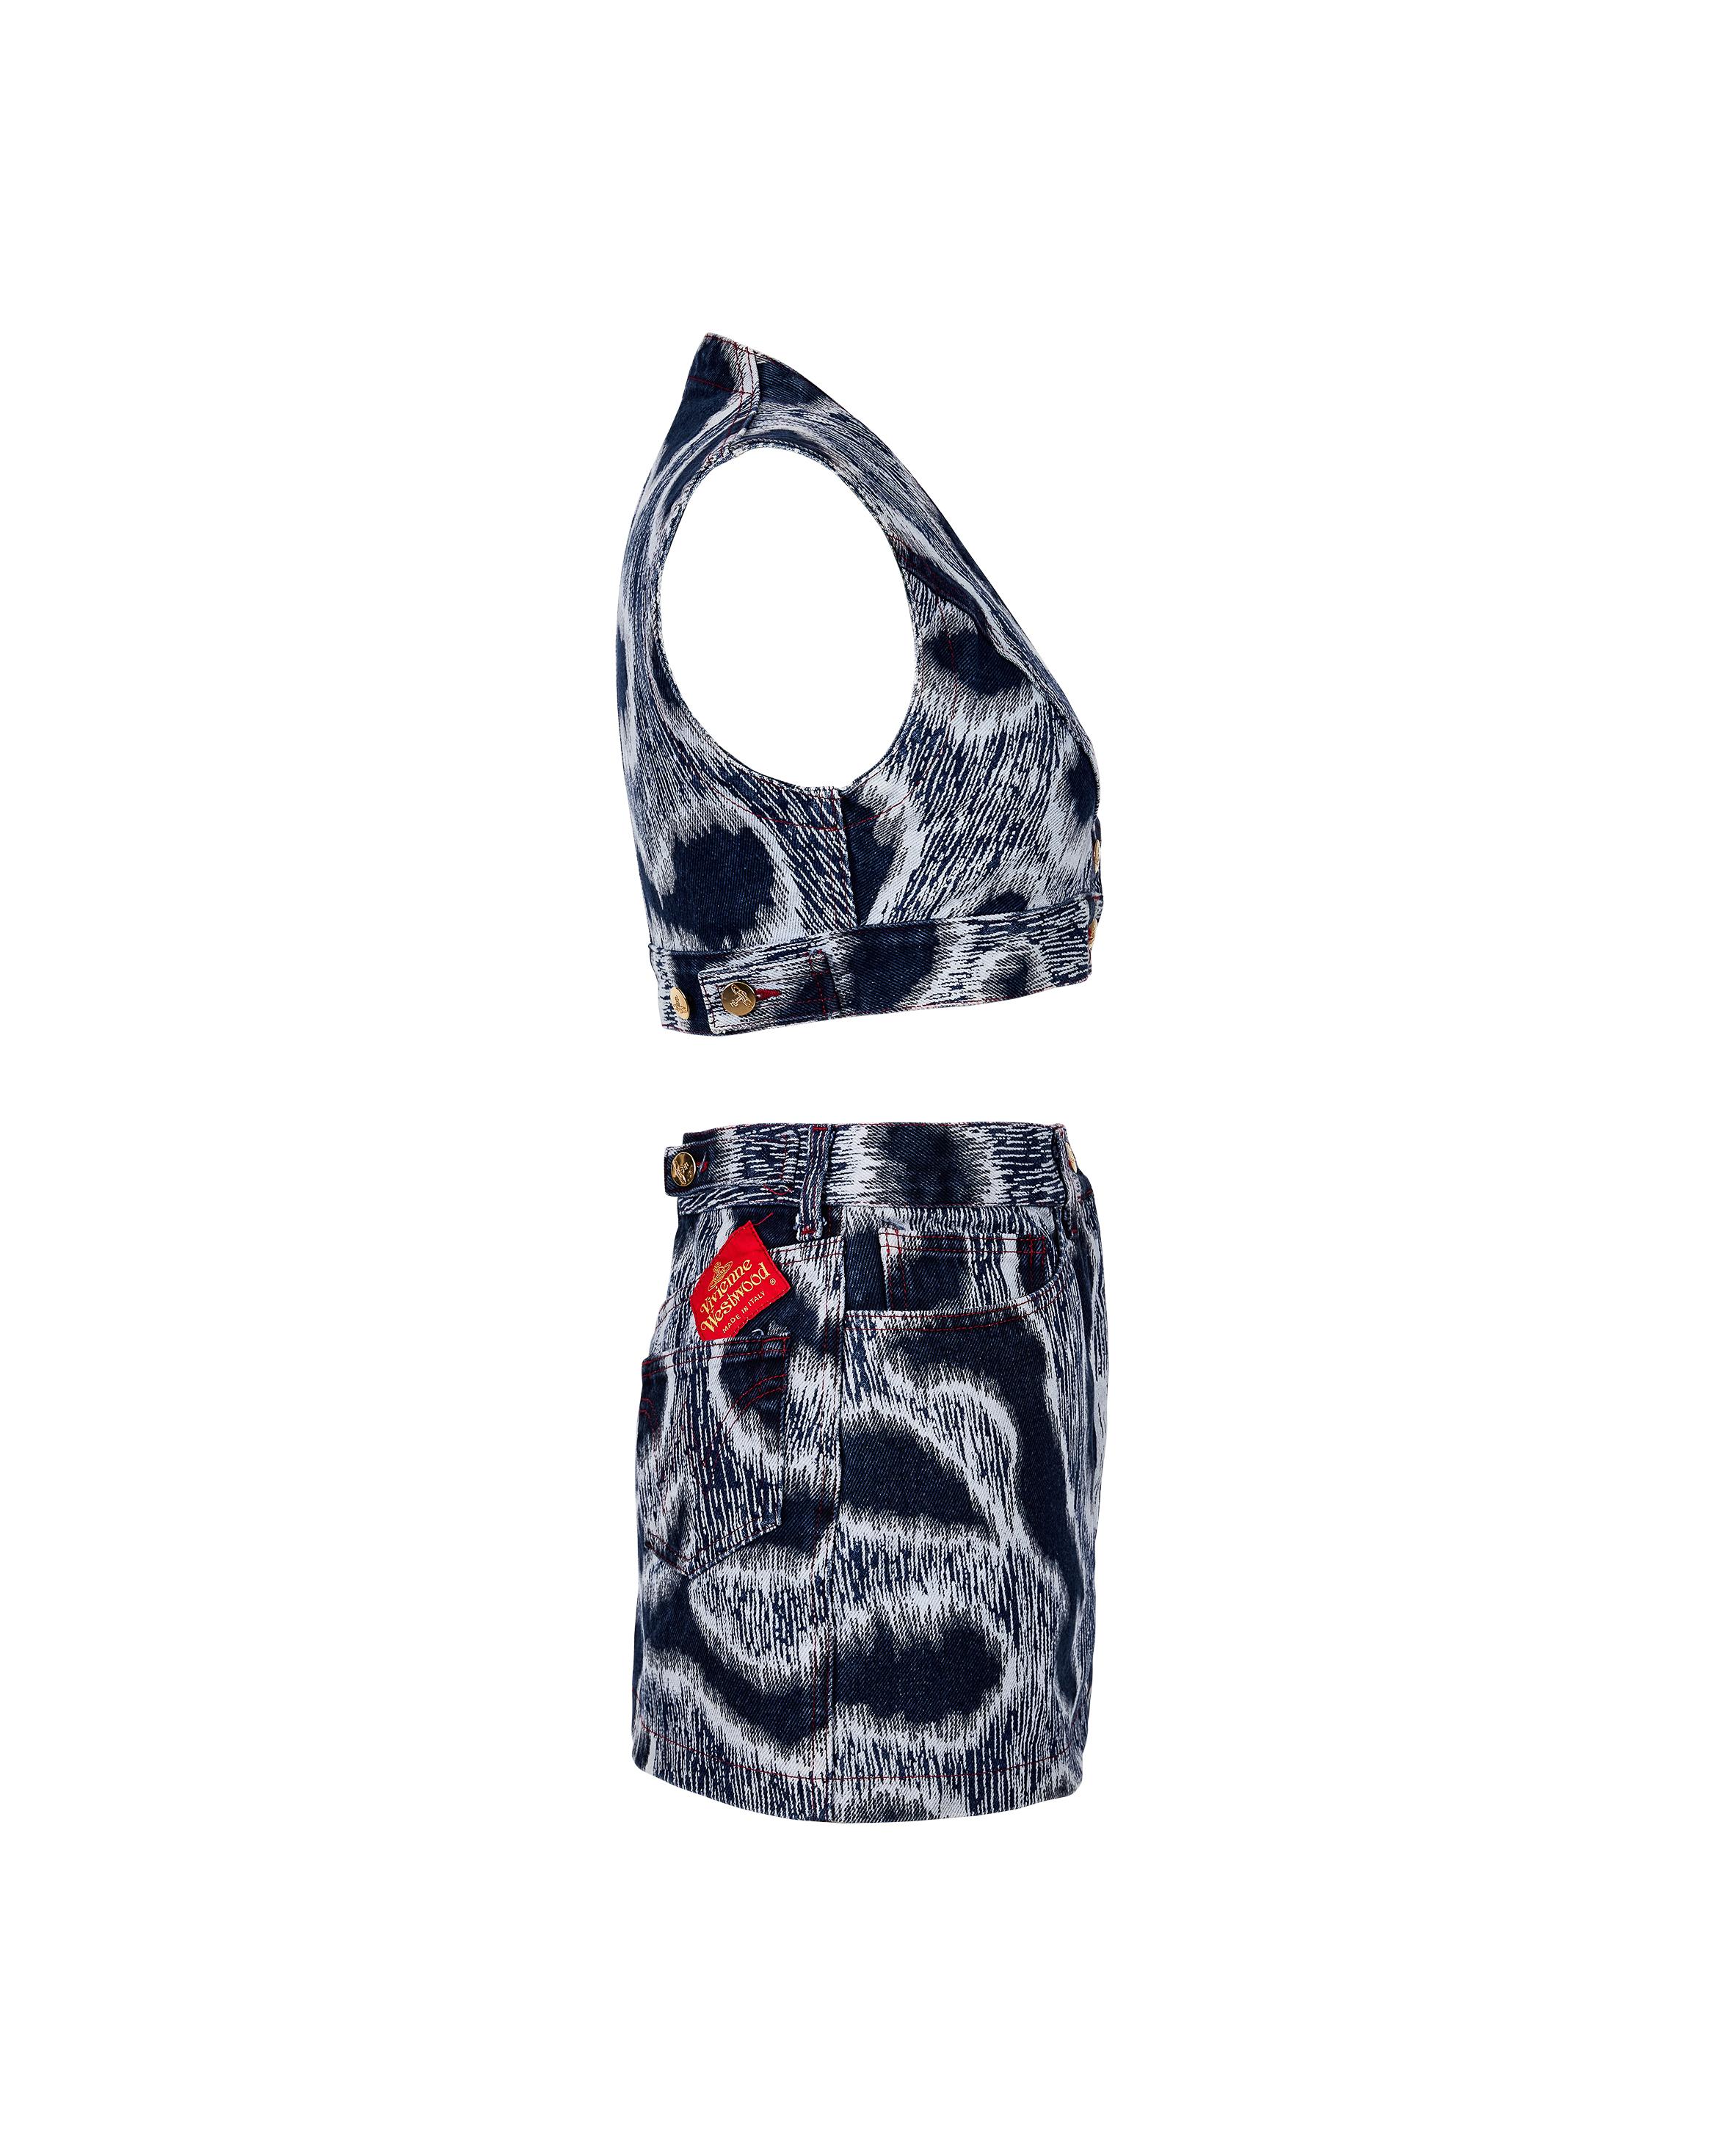 S/S 1994 Vivienne Westwood 'Cafe Society' blue leopard print denim bustier and skirt set. Red contrast stitching throughout. Short bustier vest top with signature orb gold buttons and scoop neck. Denim micro miniskirt features Westwood orb button,